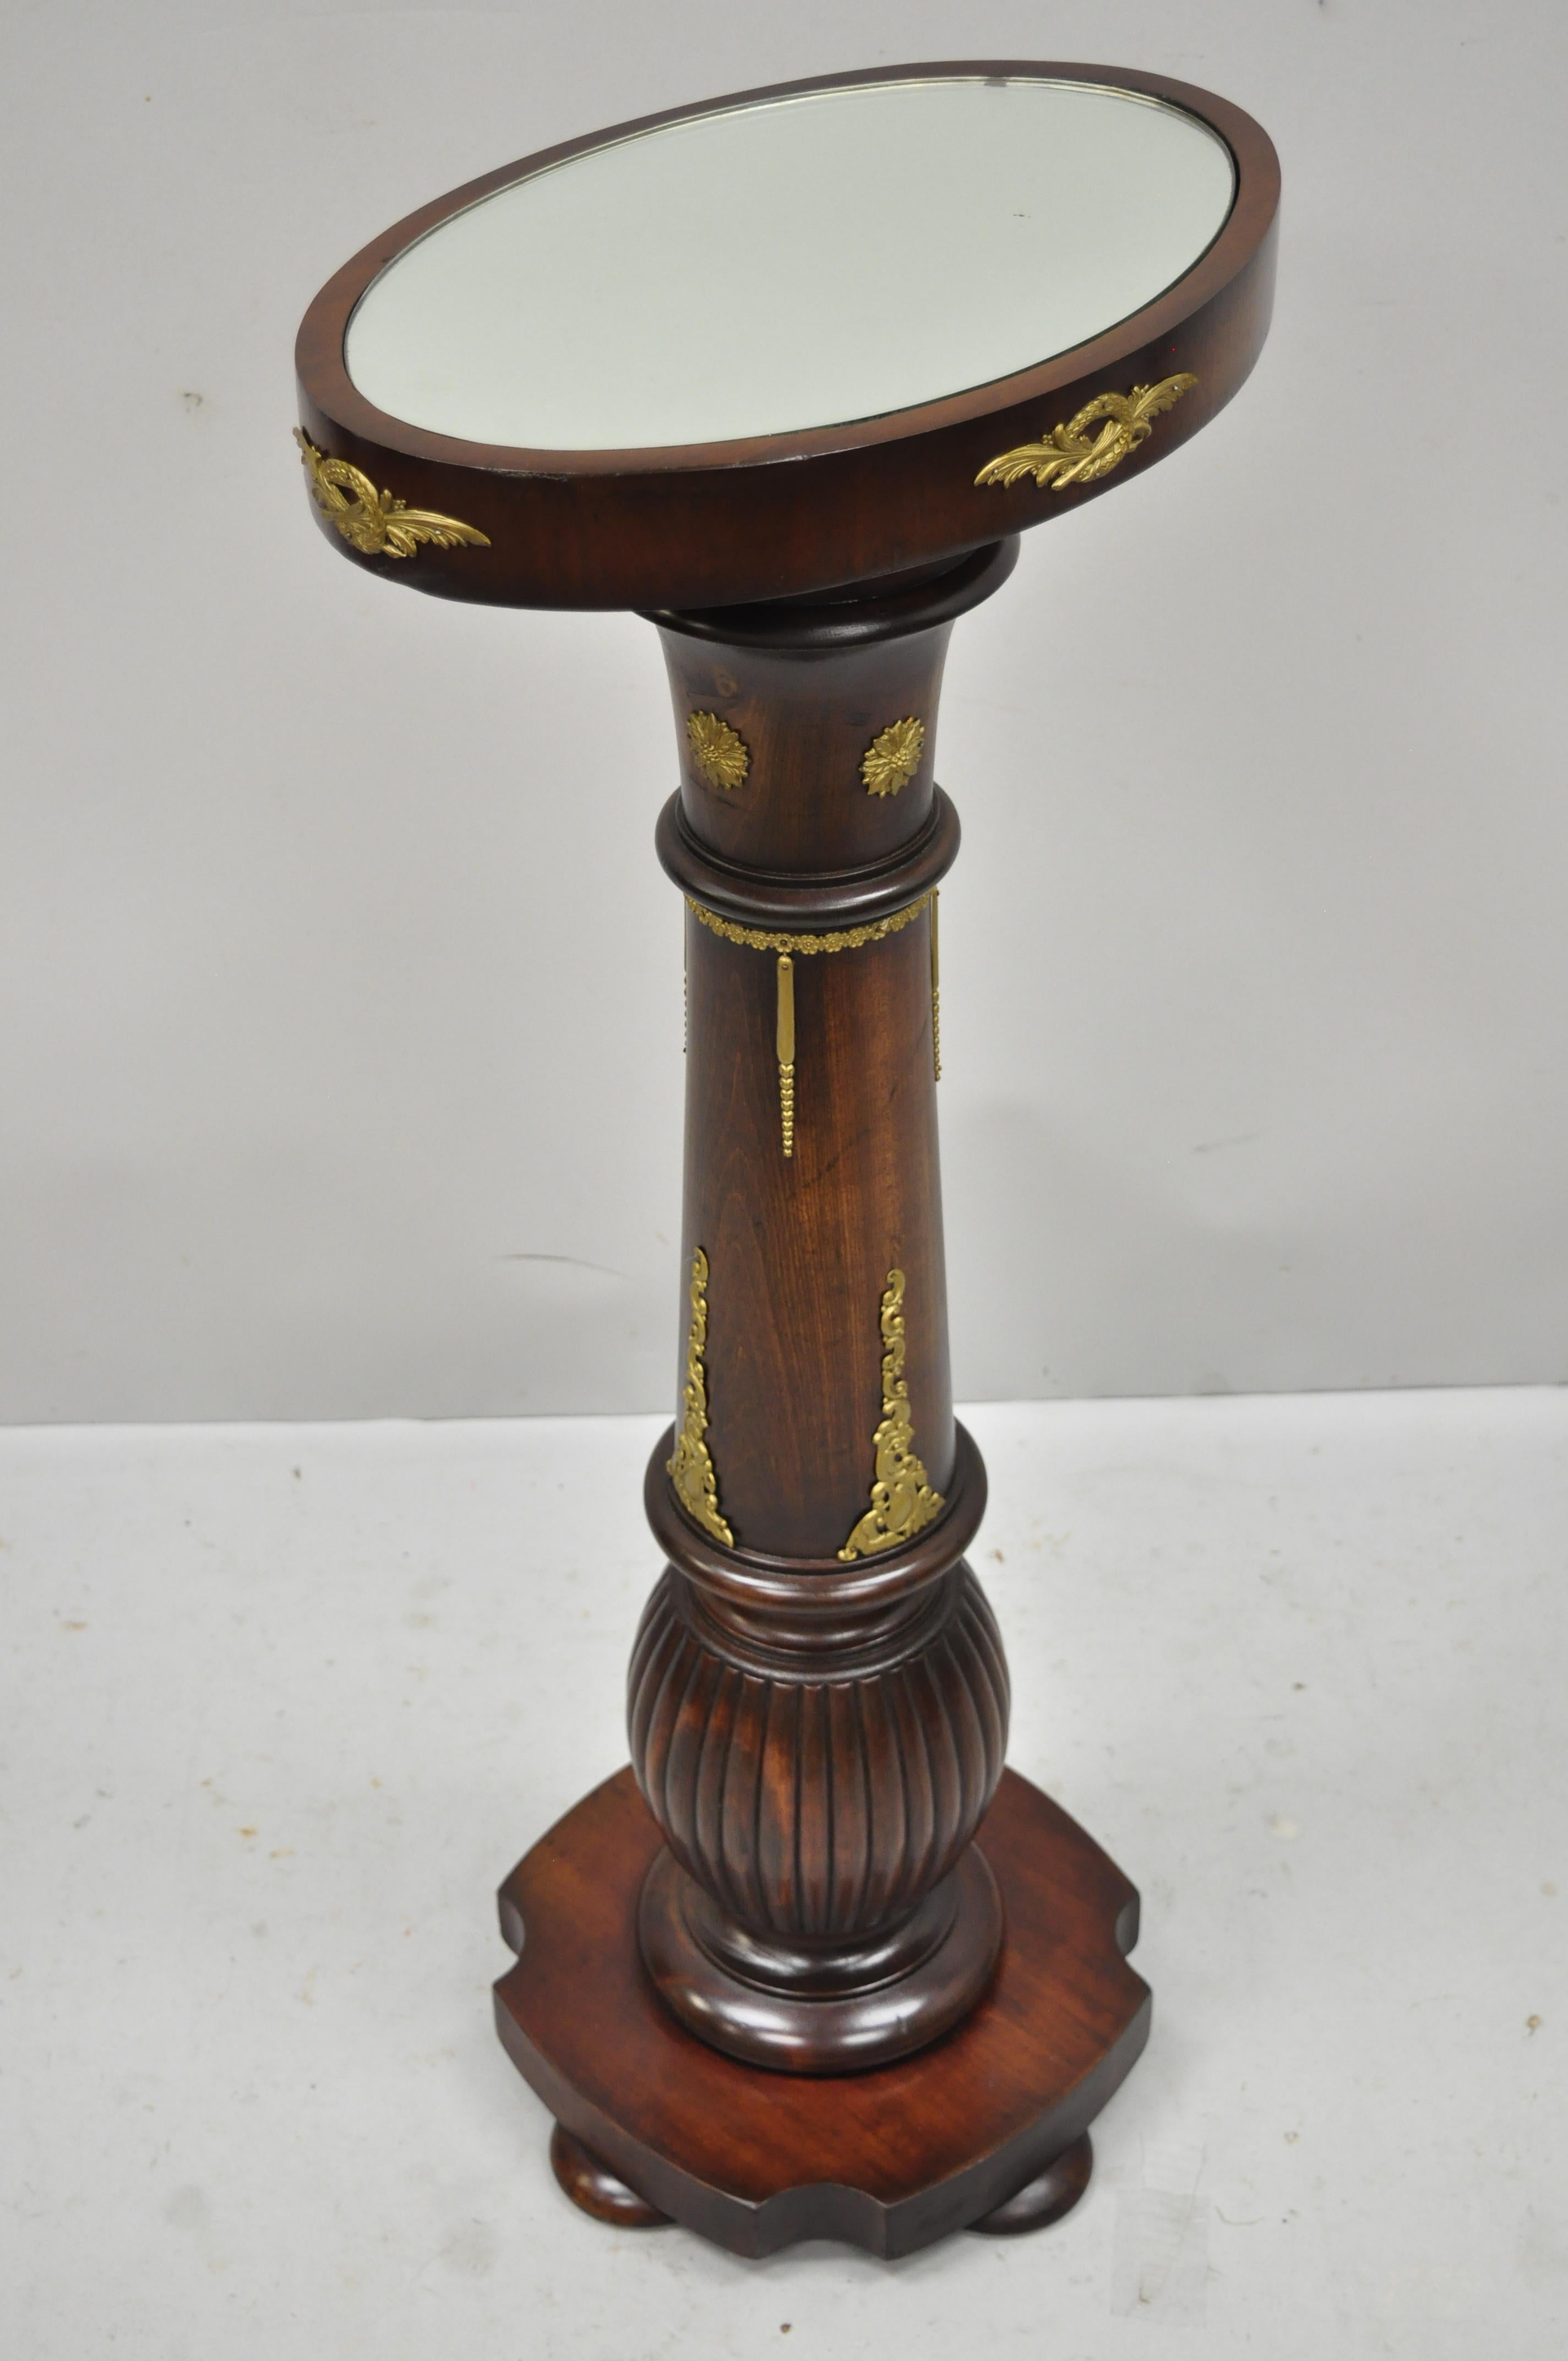 Antique French empire style wood column oval mirror top pedestal plant stand. Item features oval mirror top, brass ormolu, solid wood construction, nicely carved details, great style and form, circa early to mid-20th century. Measurements: